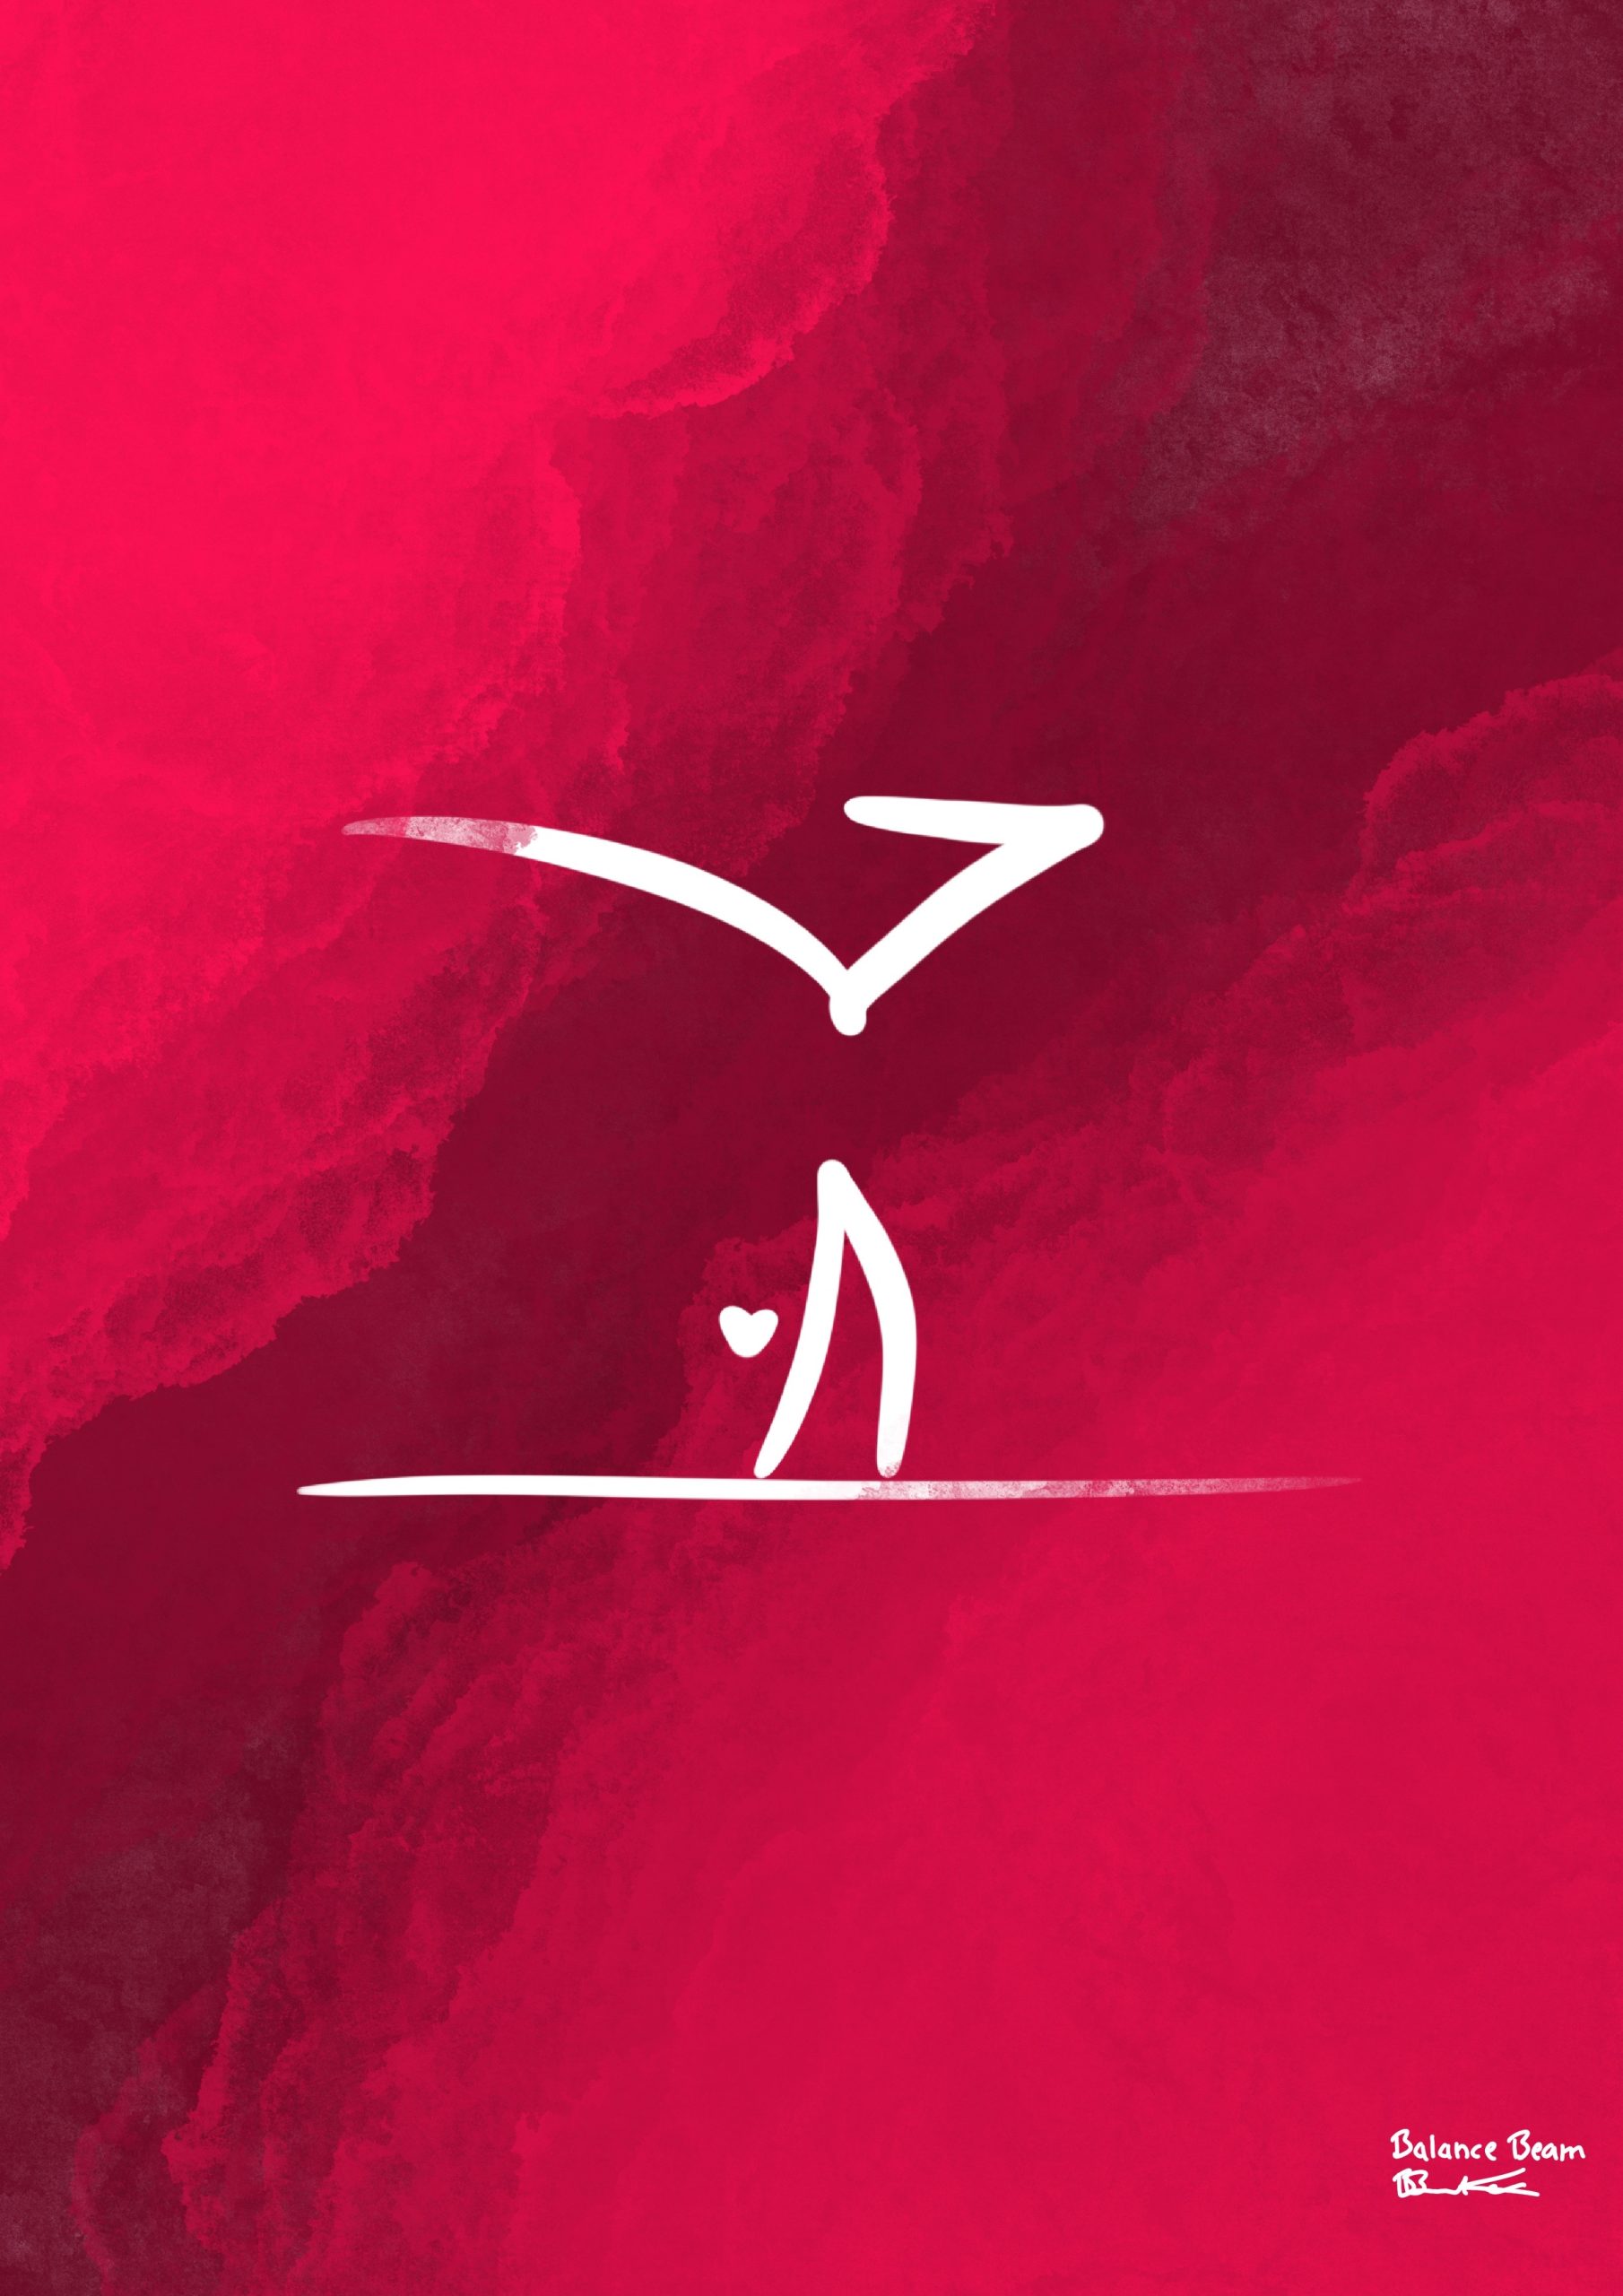 A minimalist linework design of a gymnast doing a handstand against a gradient red background.